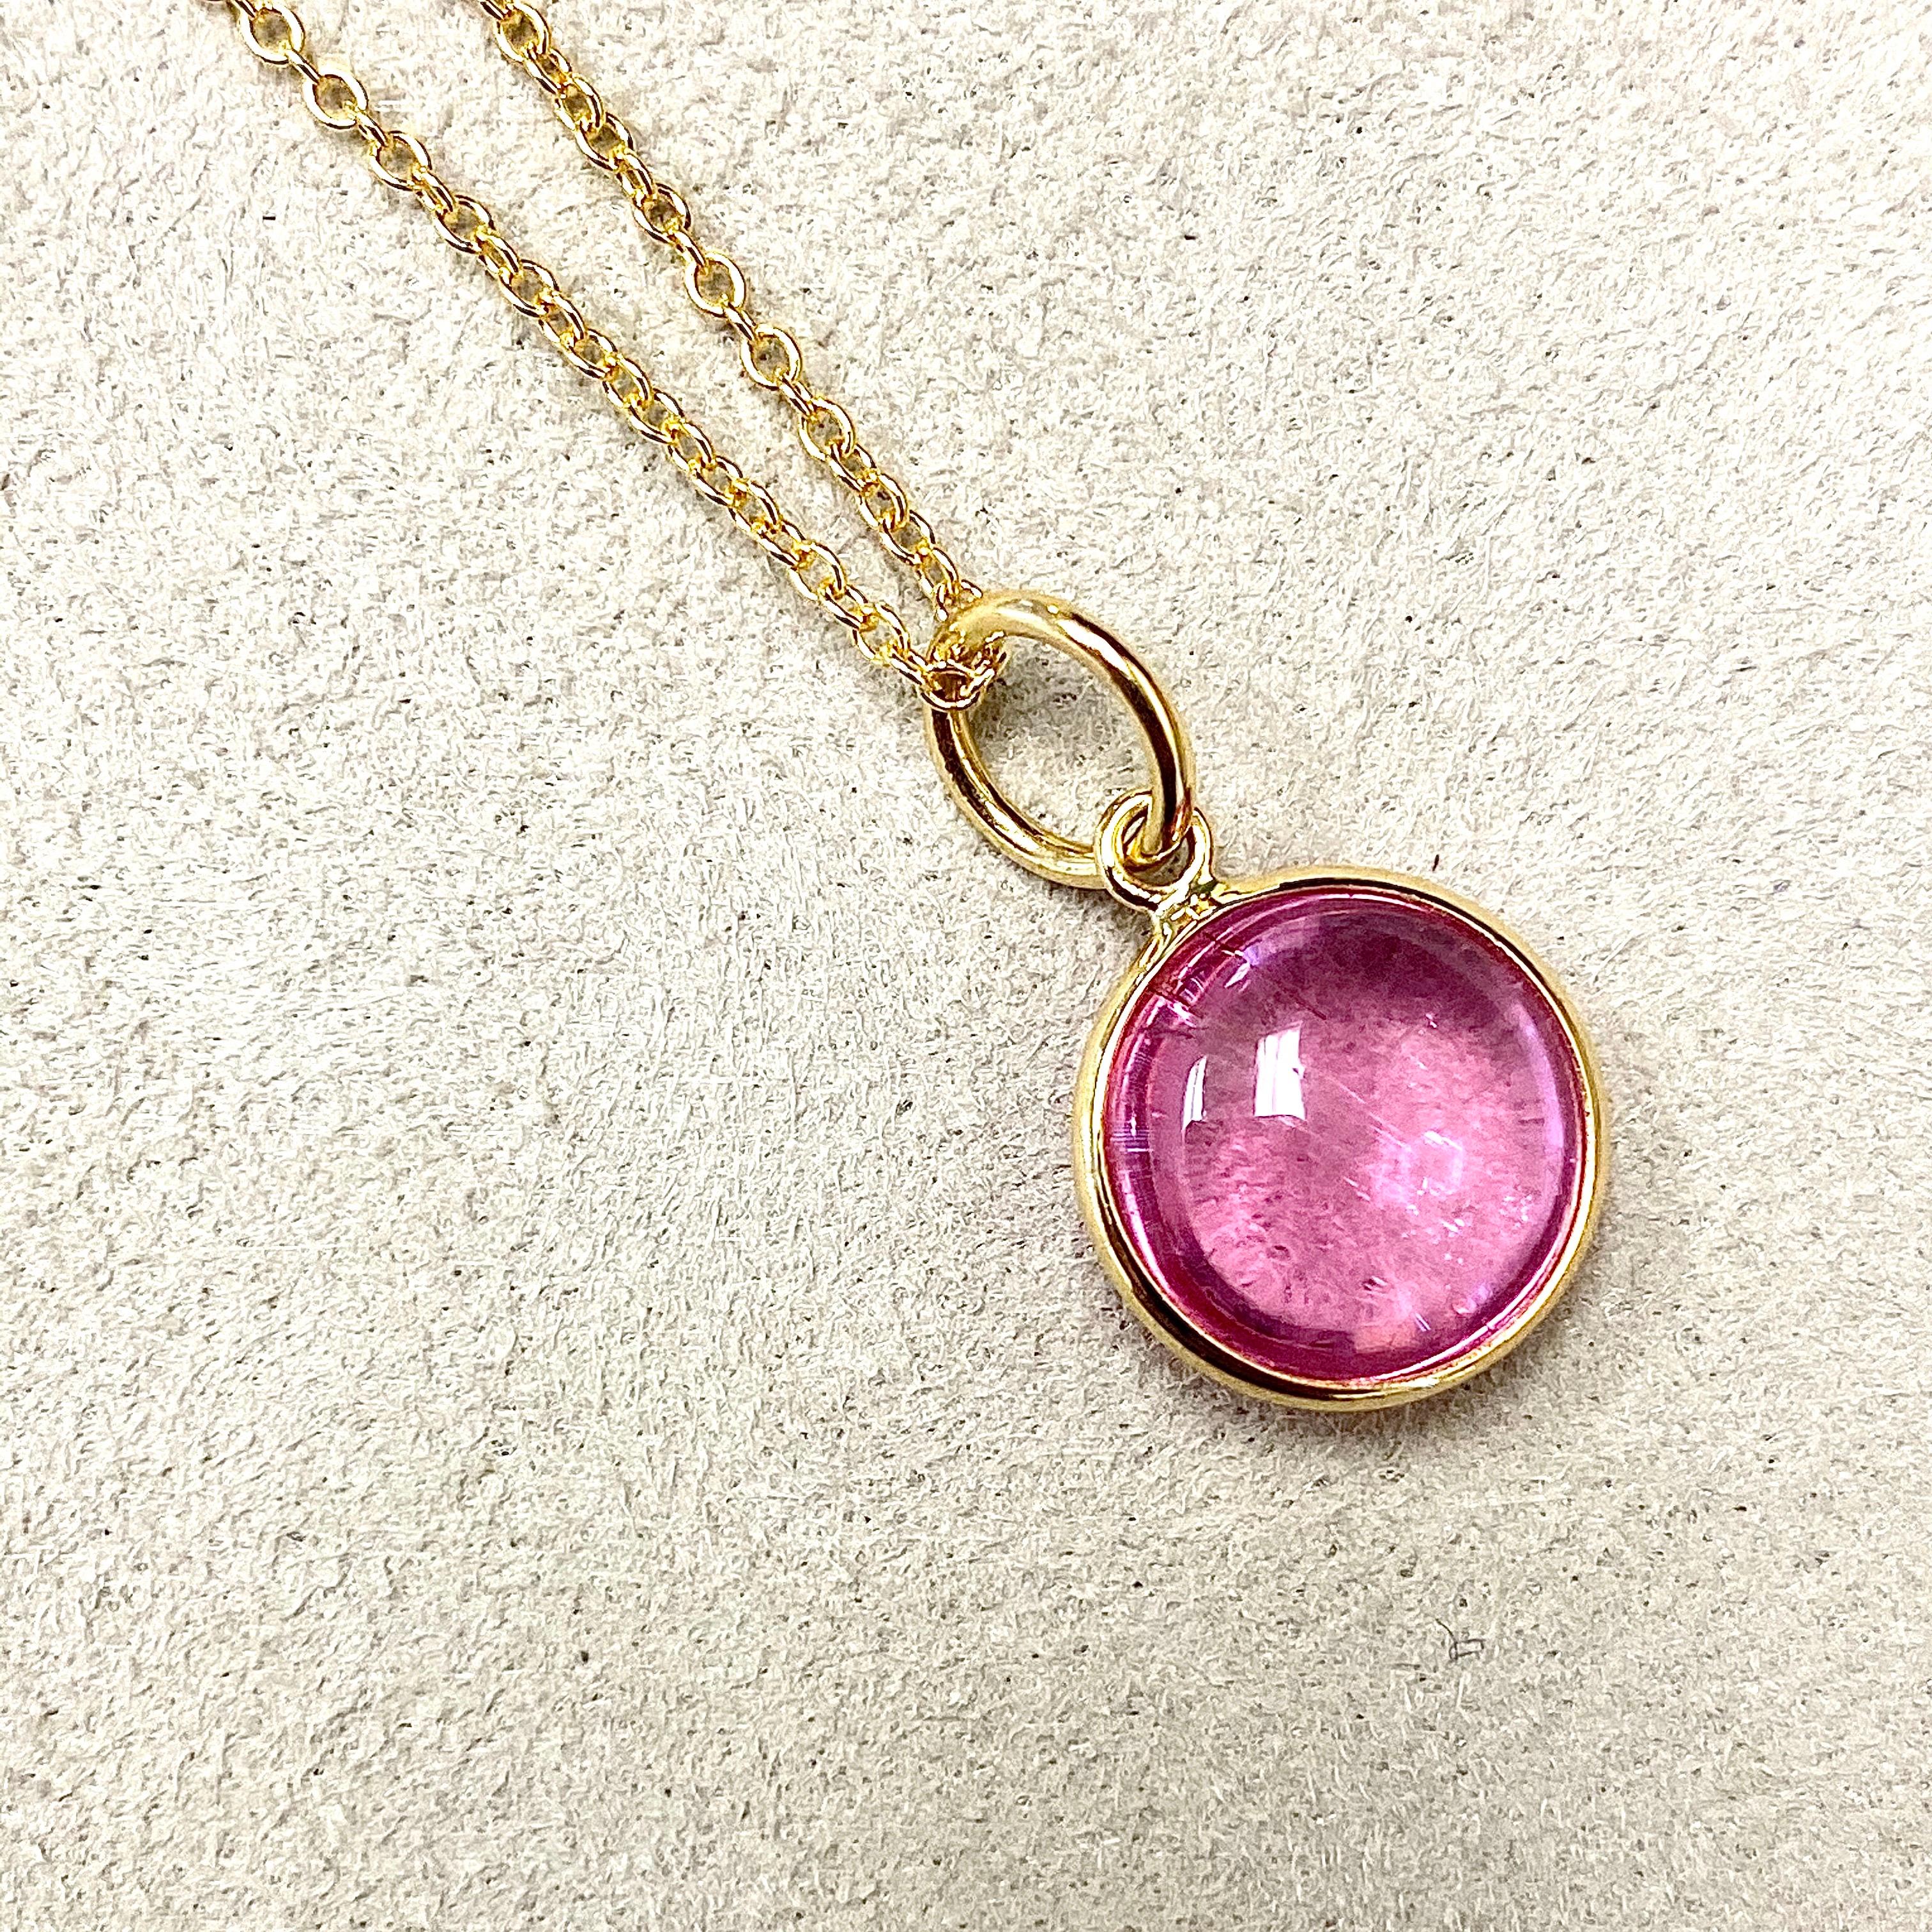 Created in 18 karat yellow gold
10 mm size charm
Pink Tourmaline 3.5 cts approx
October birthstone
Chain sold separately 

Crafted from luxurious 18 karat yellow gold, this regal pendant has an impressively large 10 mm size charm. The mesmerizing